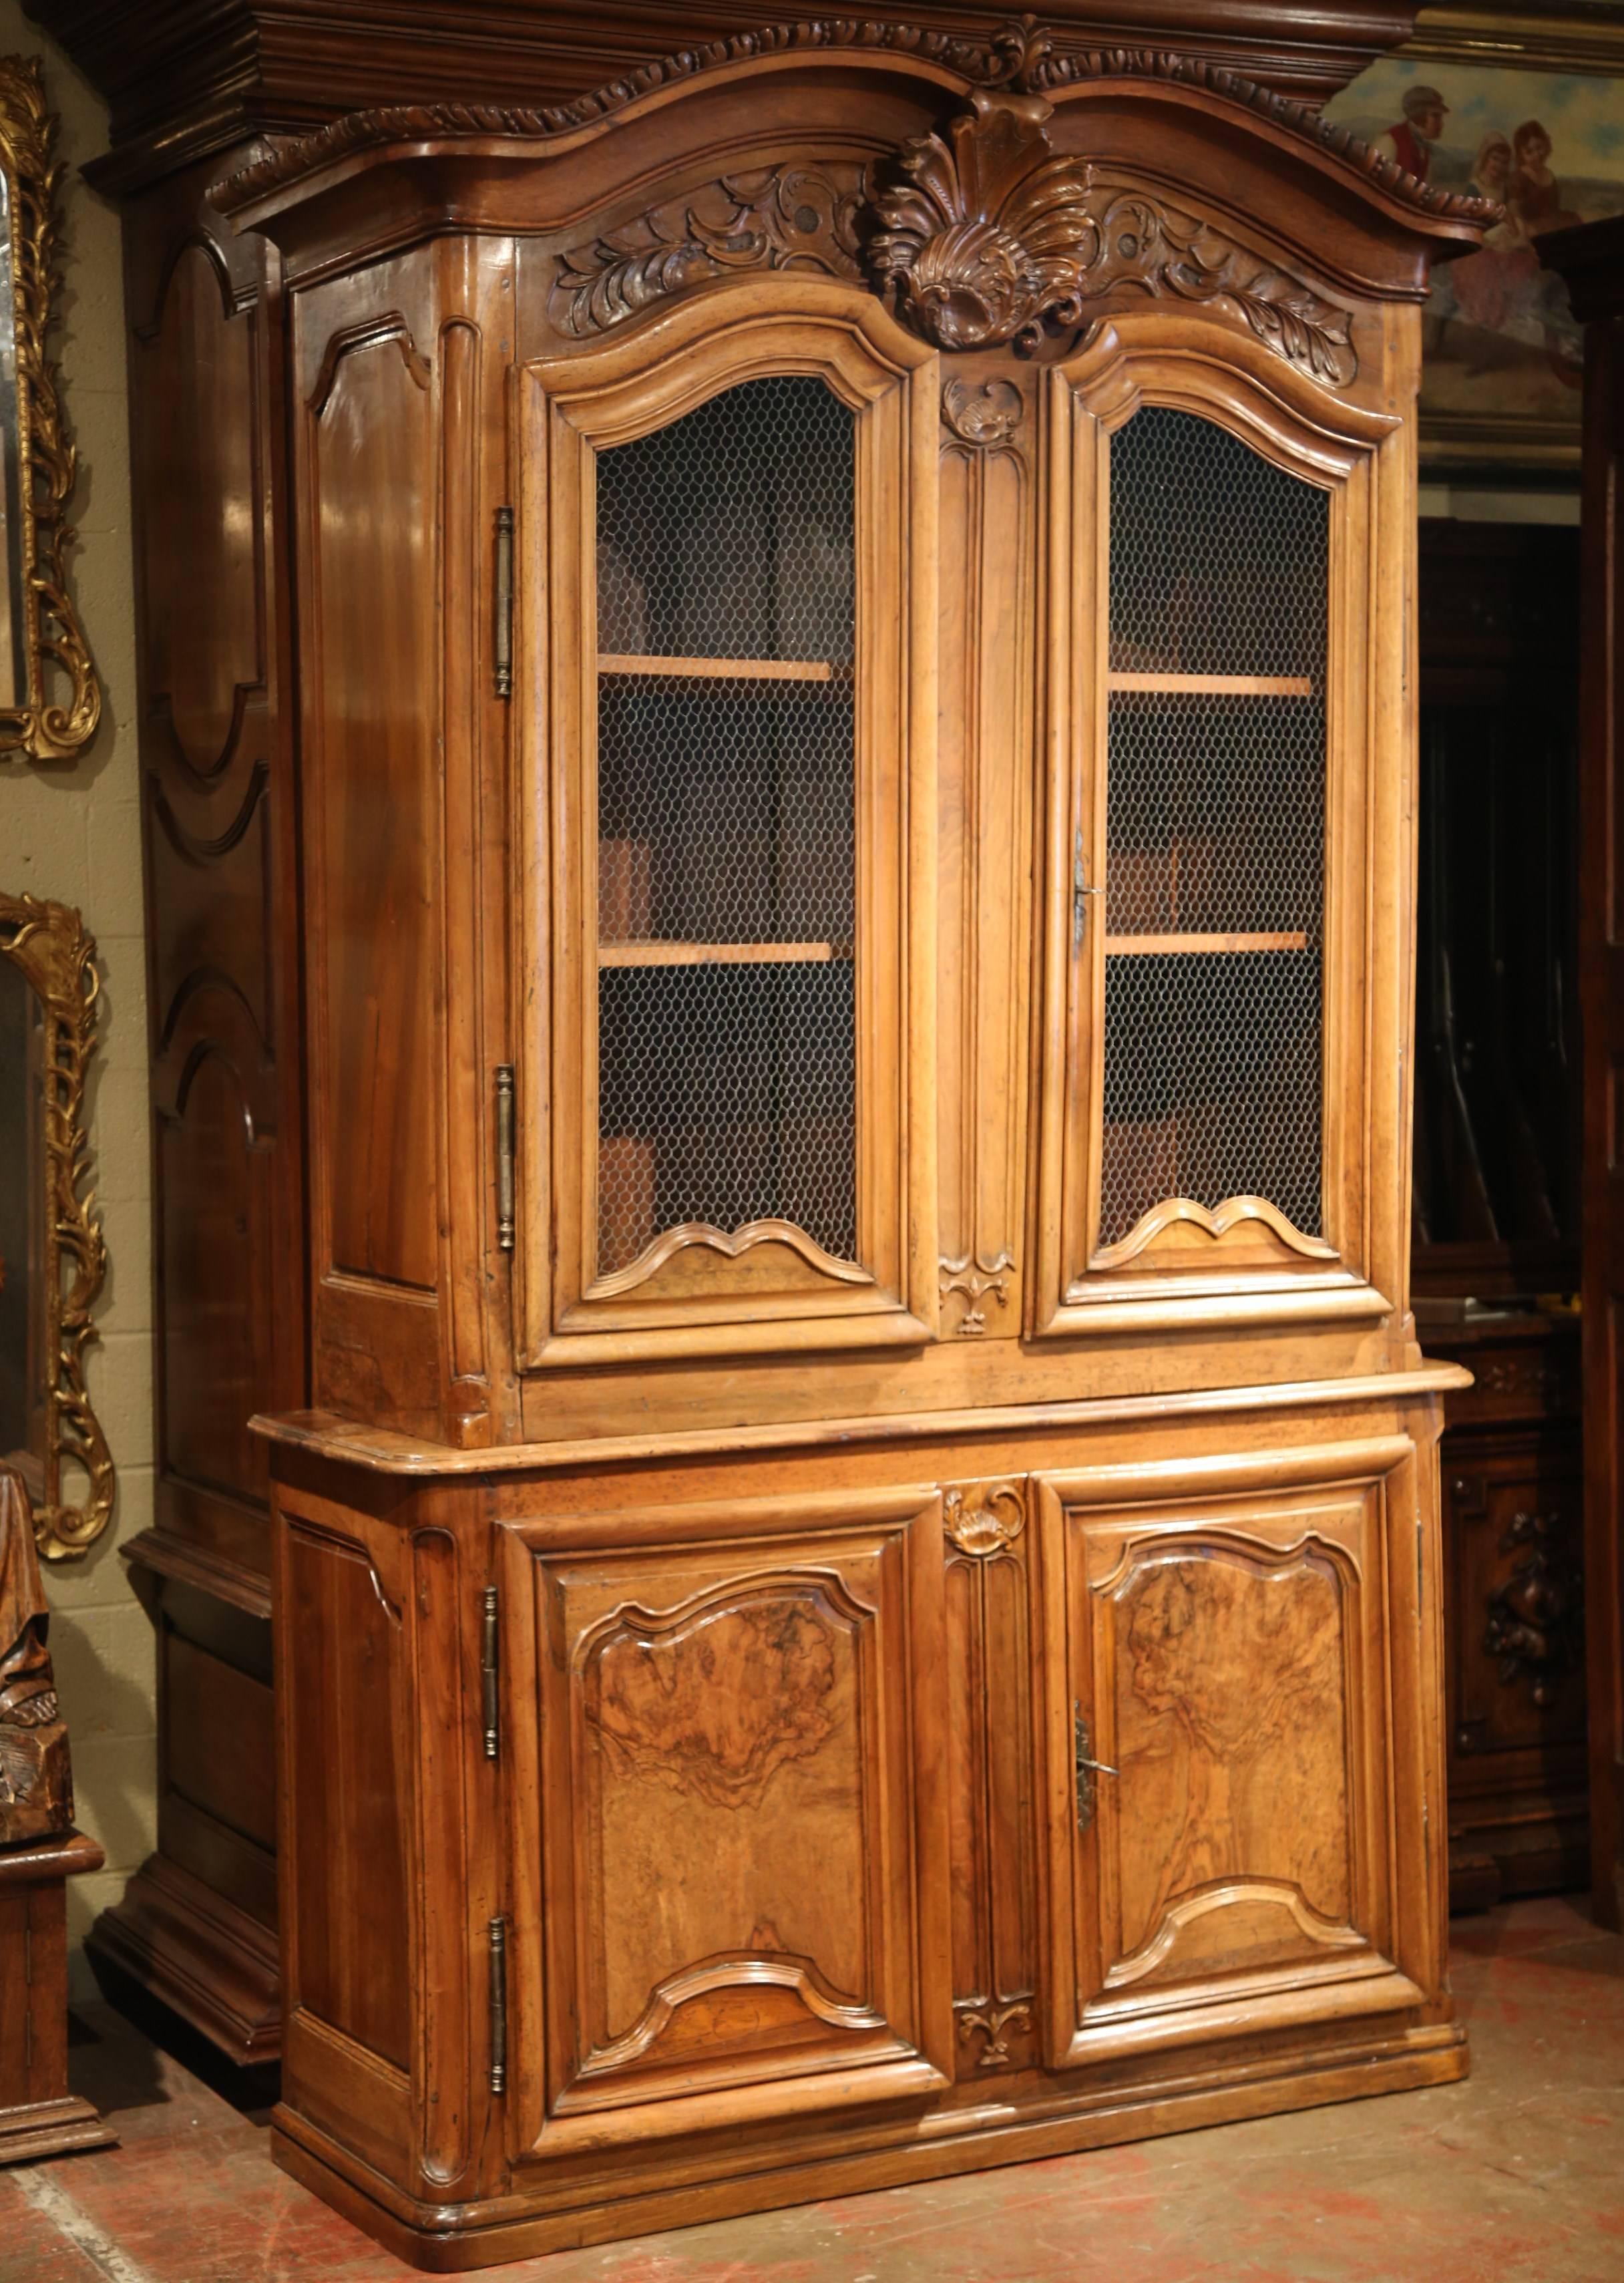 This exceptional, antique fruitwood buffet-deux-corps was carved in Lyon, France, circa 1750. Built in two parts, this tall, elegant cabinet stands on a plinth at the base; it features a 